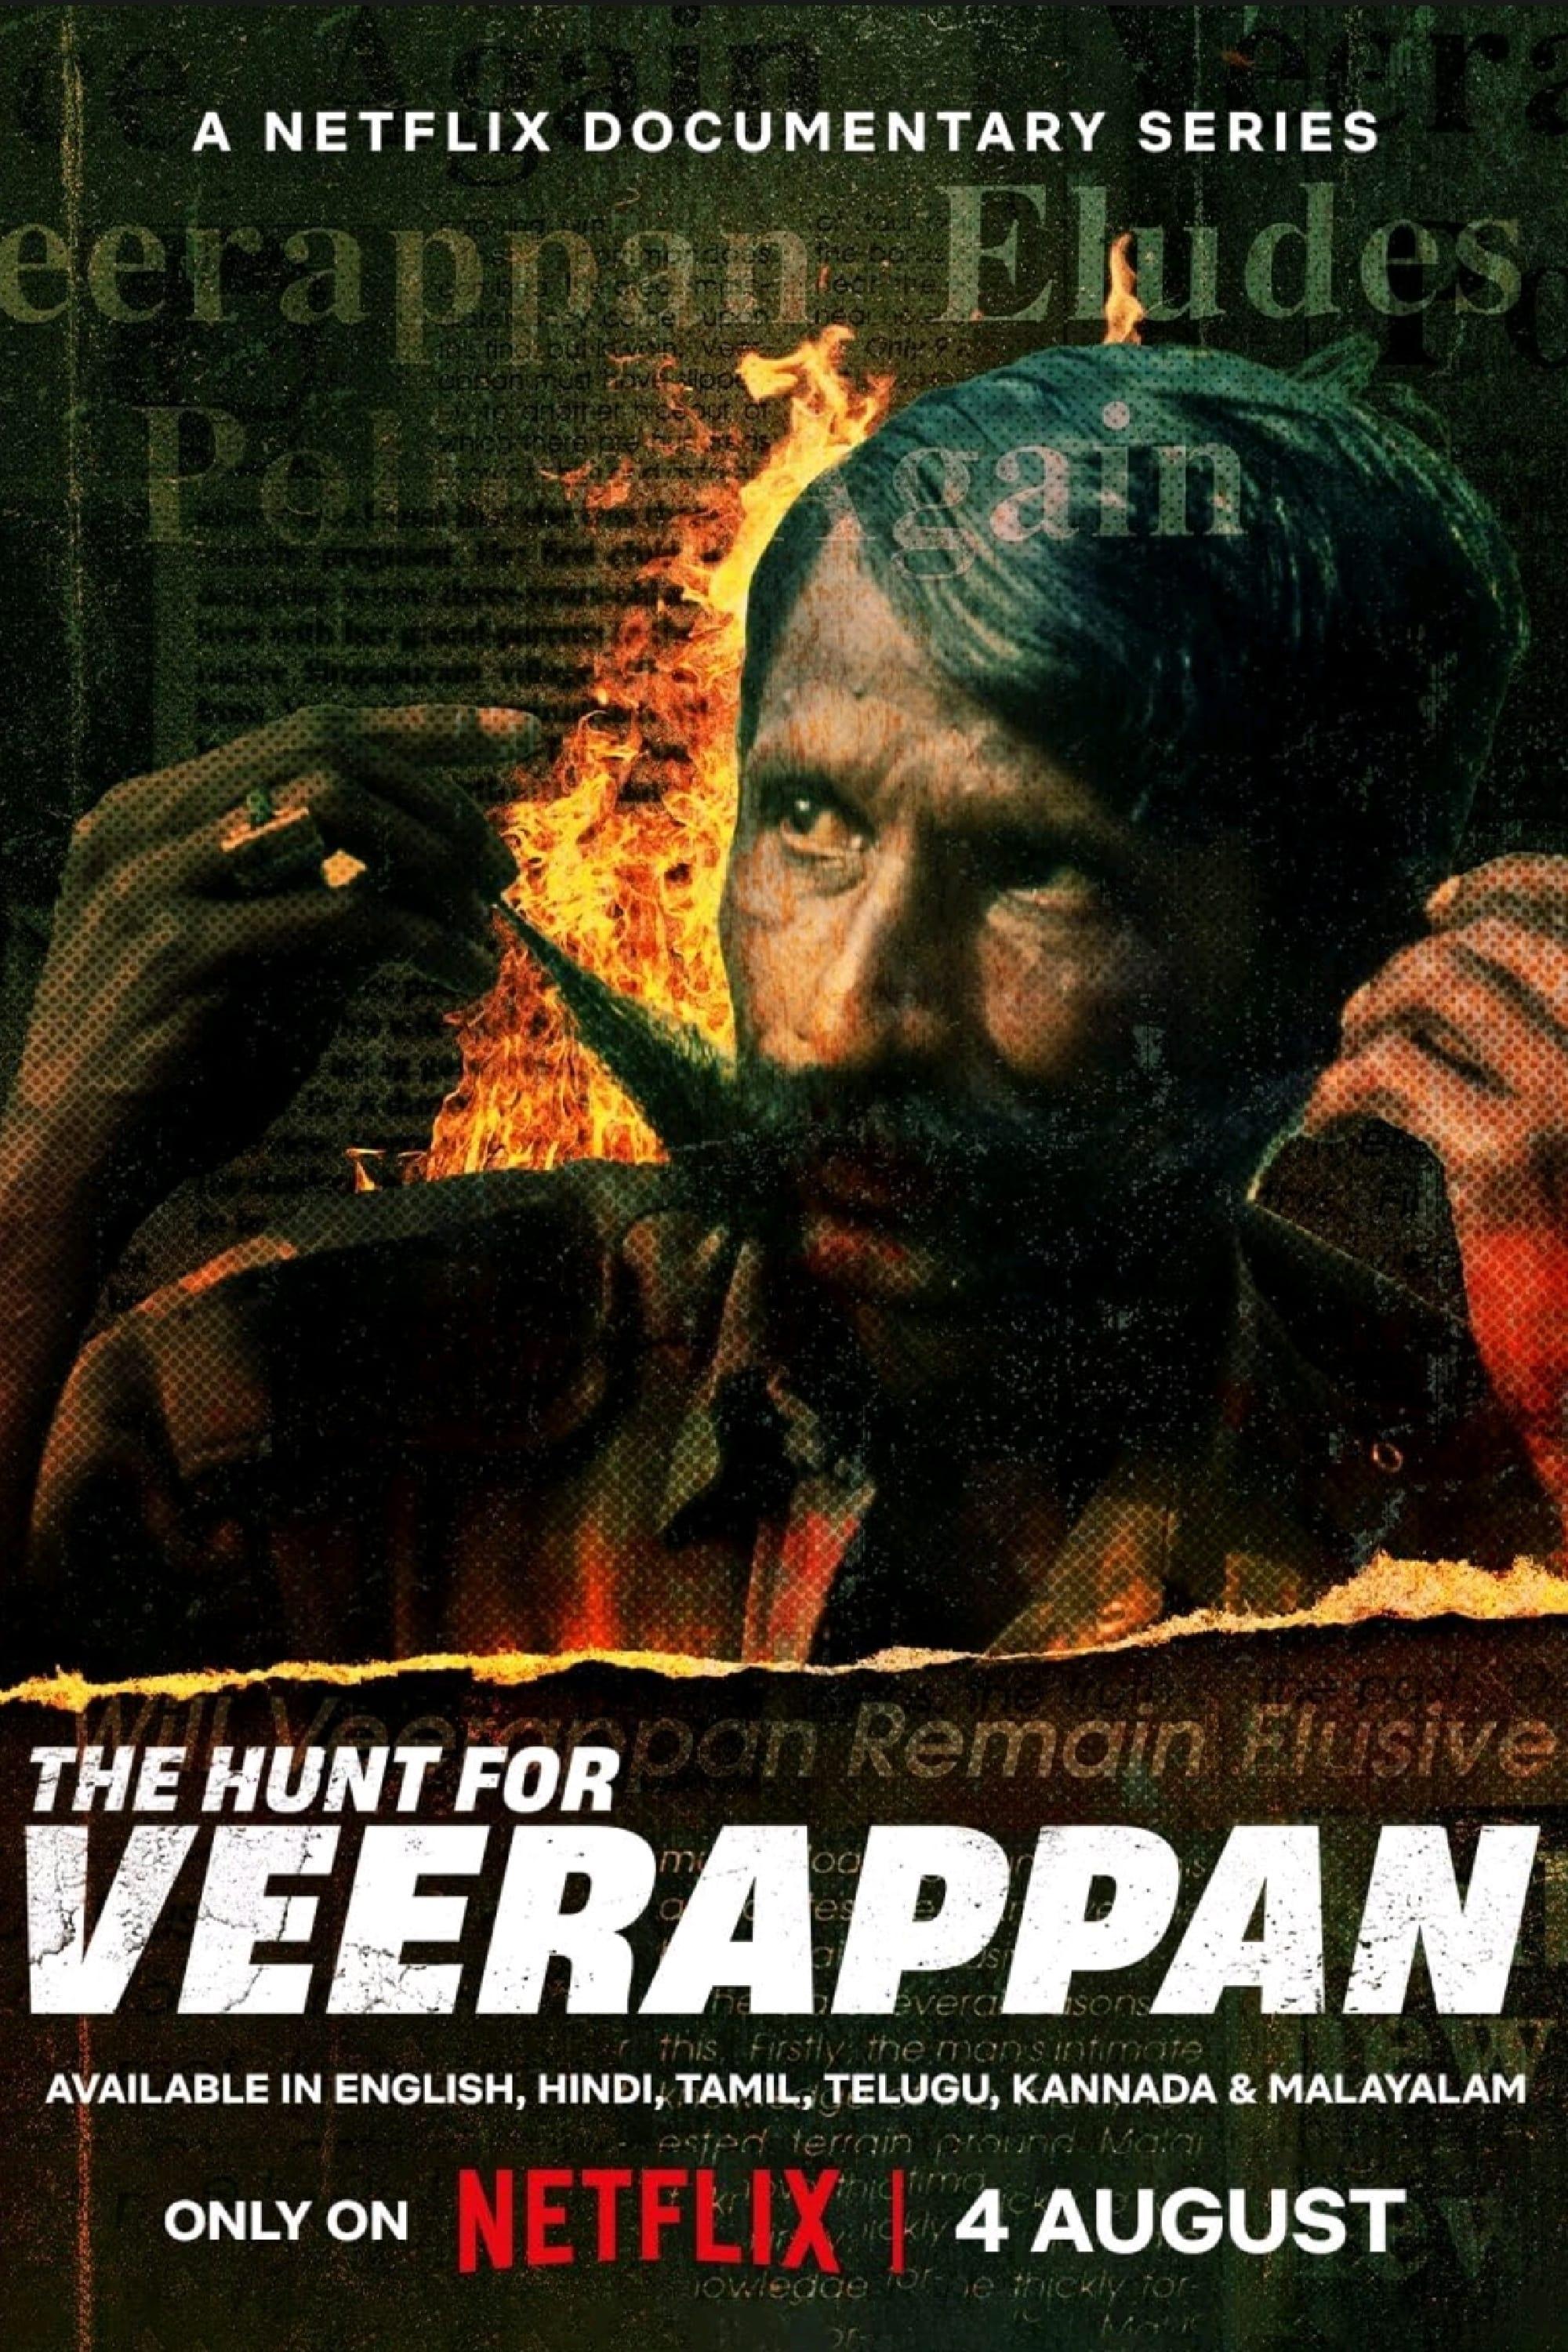 The Hunt for Veerappan poster